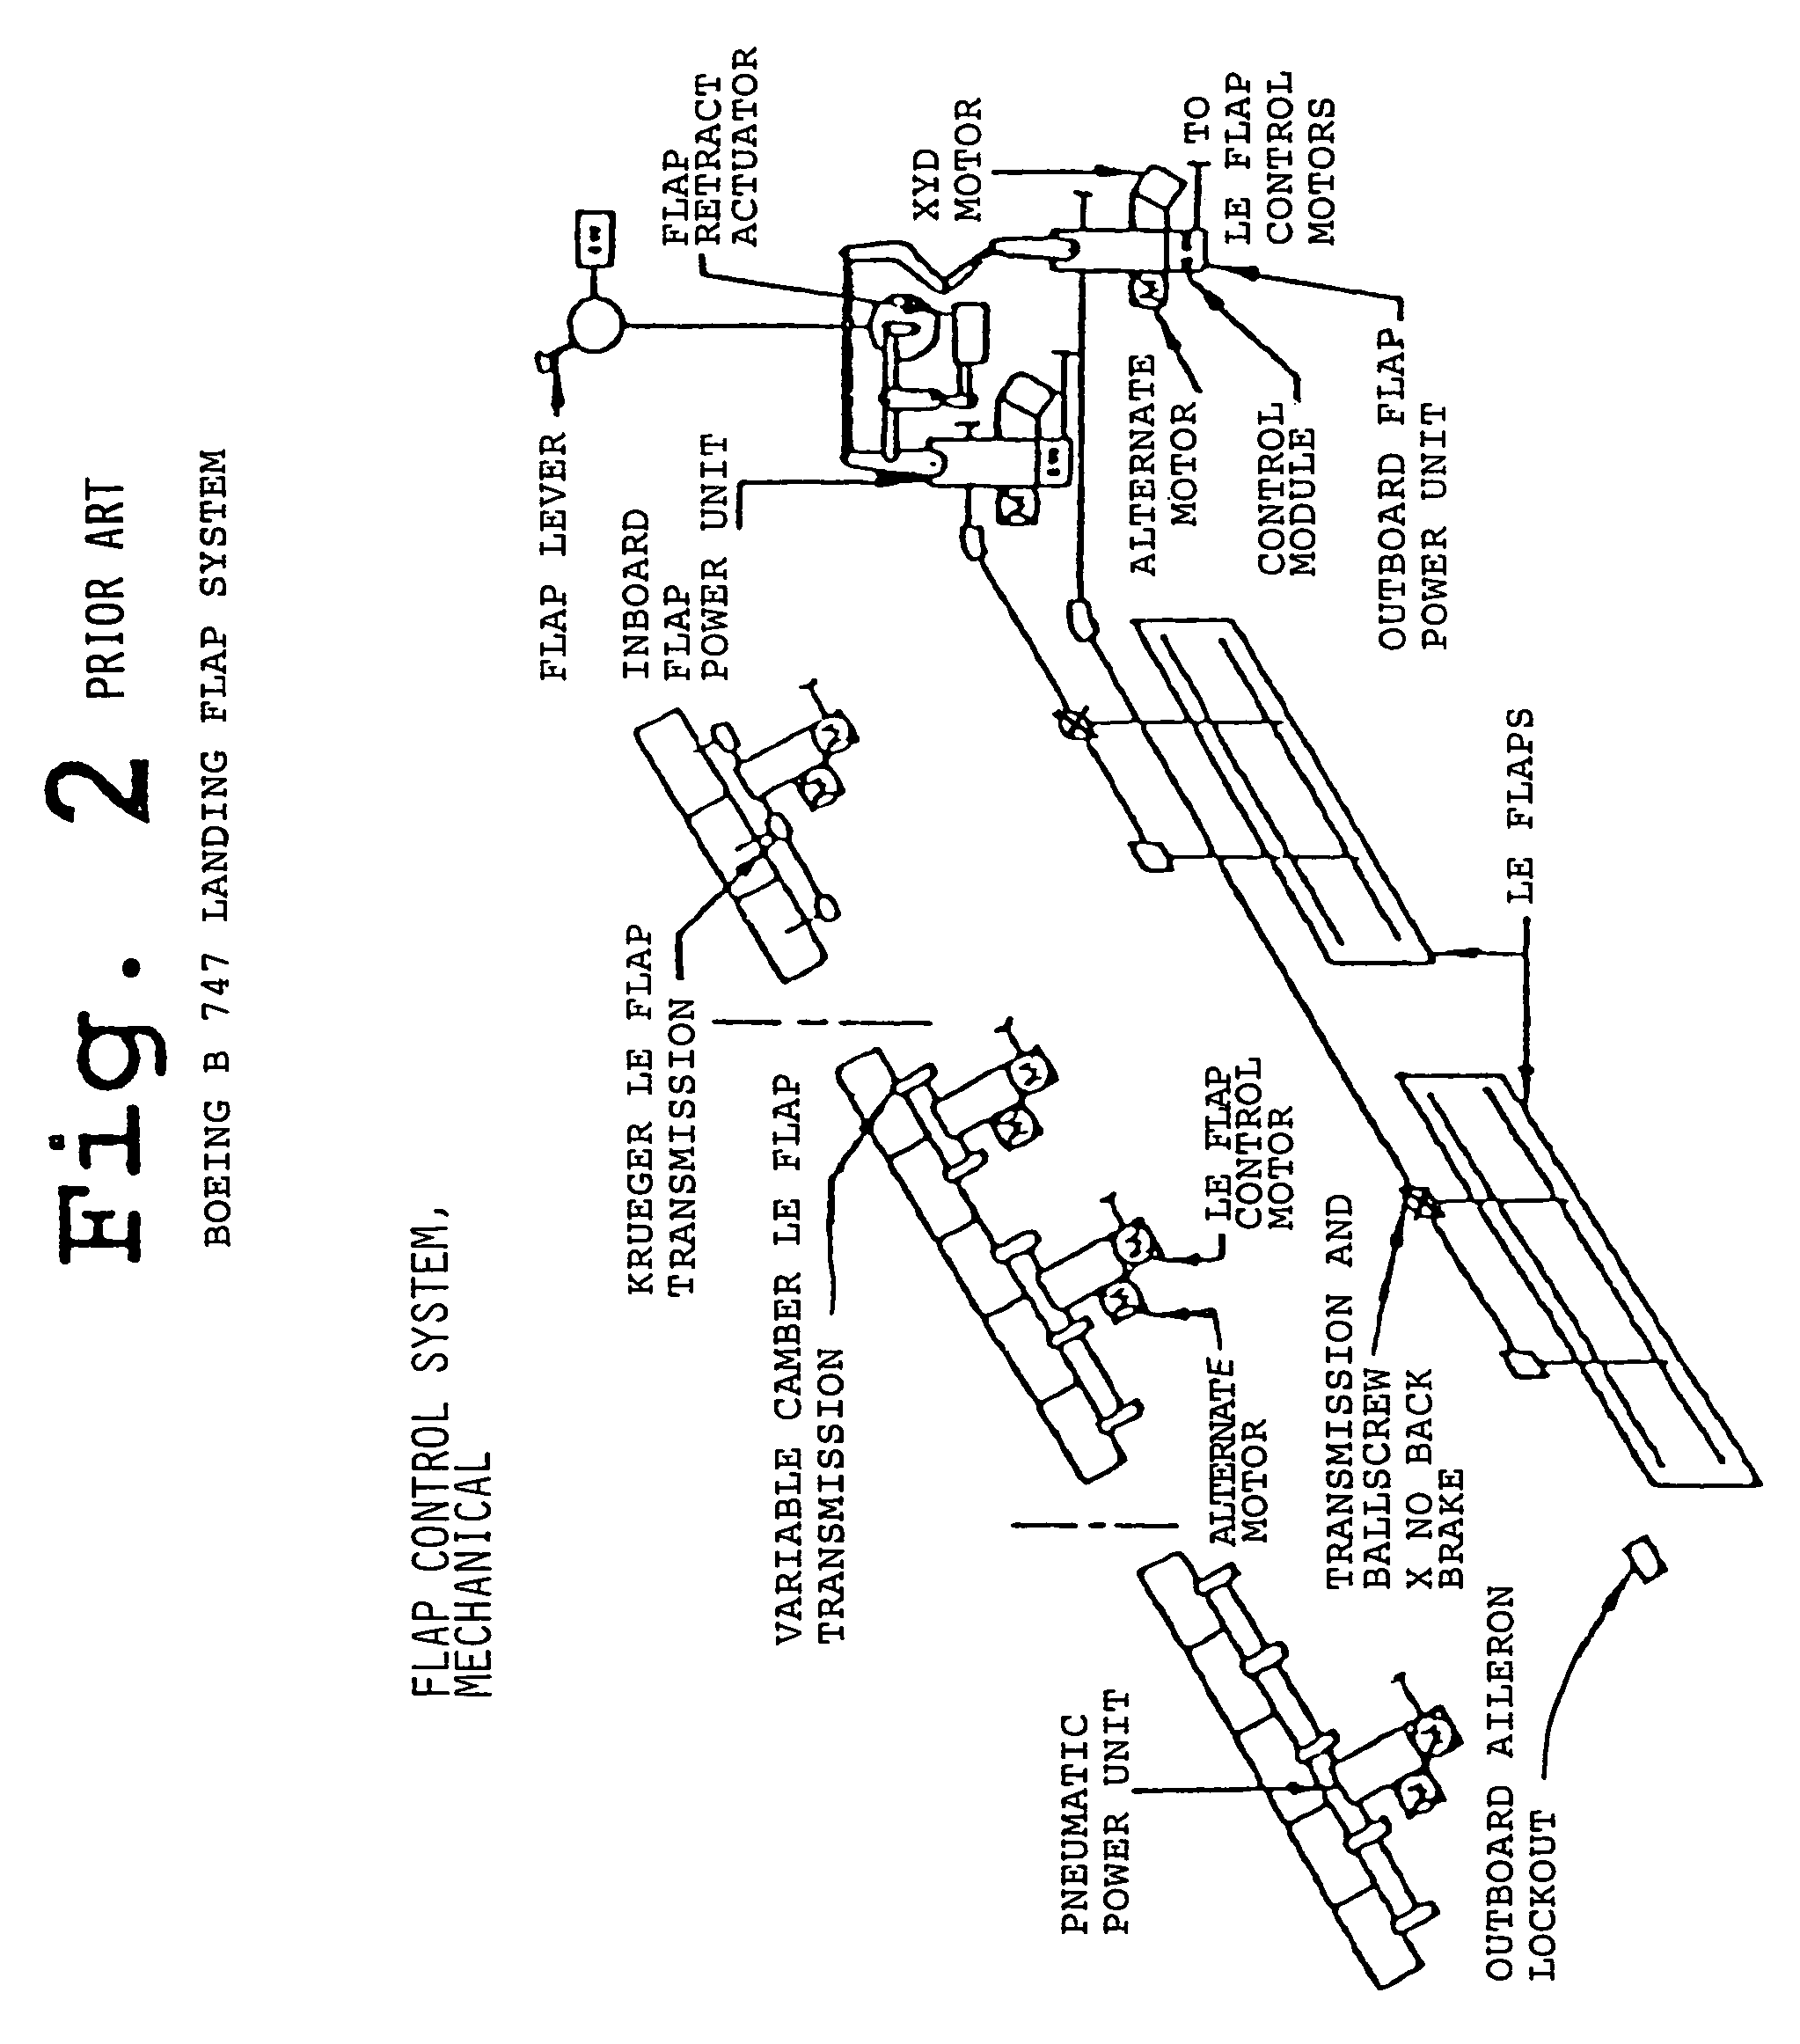 Adaptive flap and slat drive system for aircraft